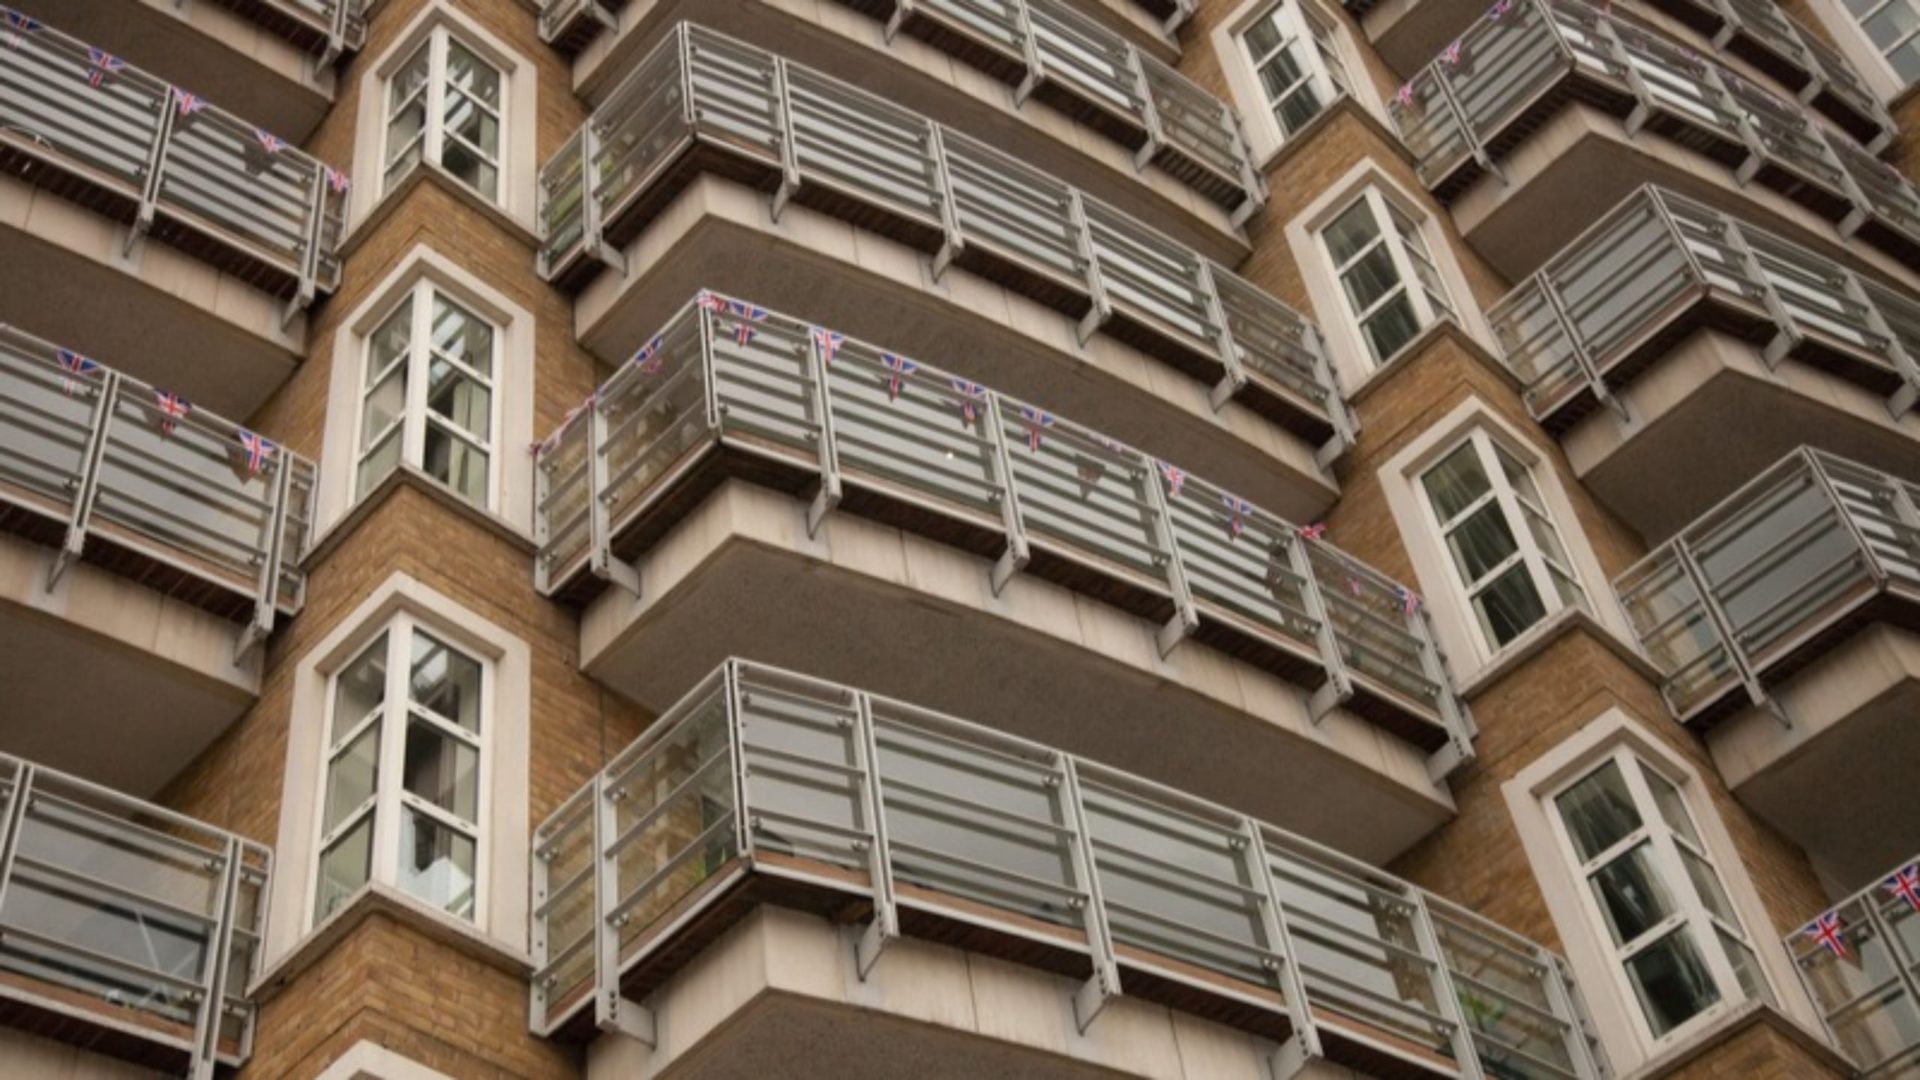 Building Safety Regime - A view of balconies and windows in a block of flats.